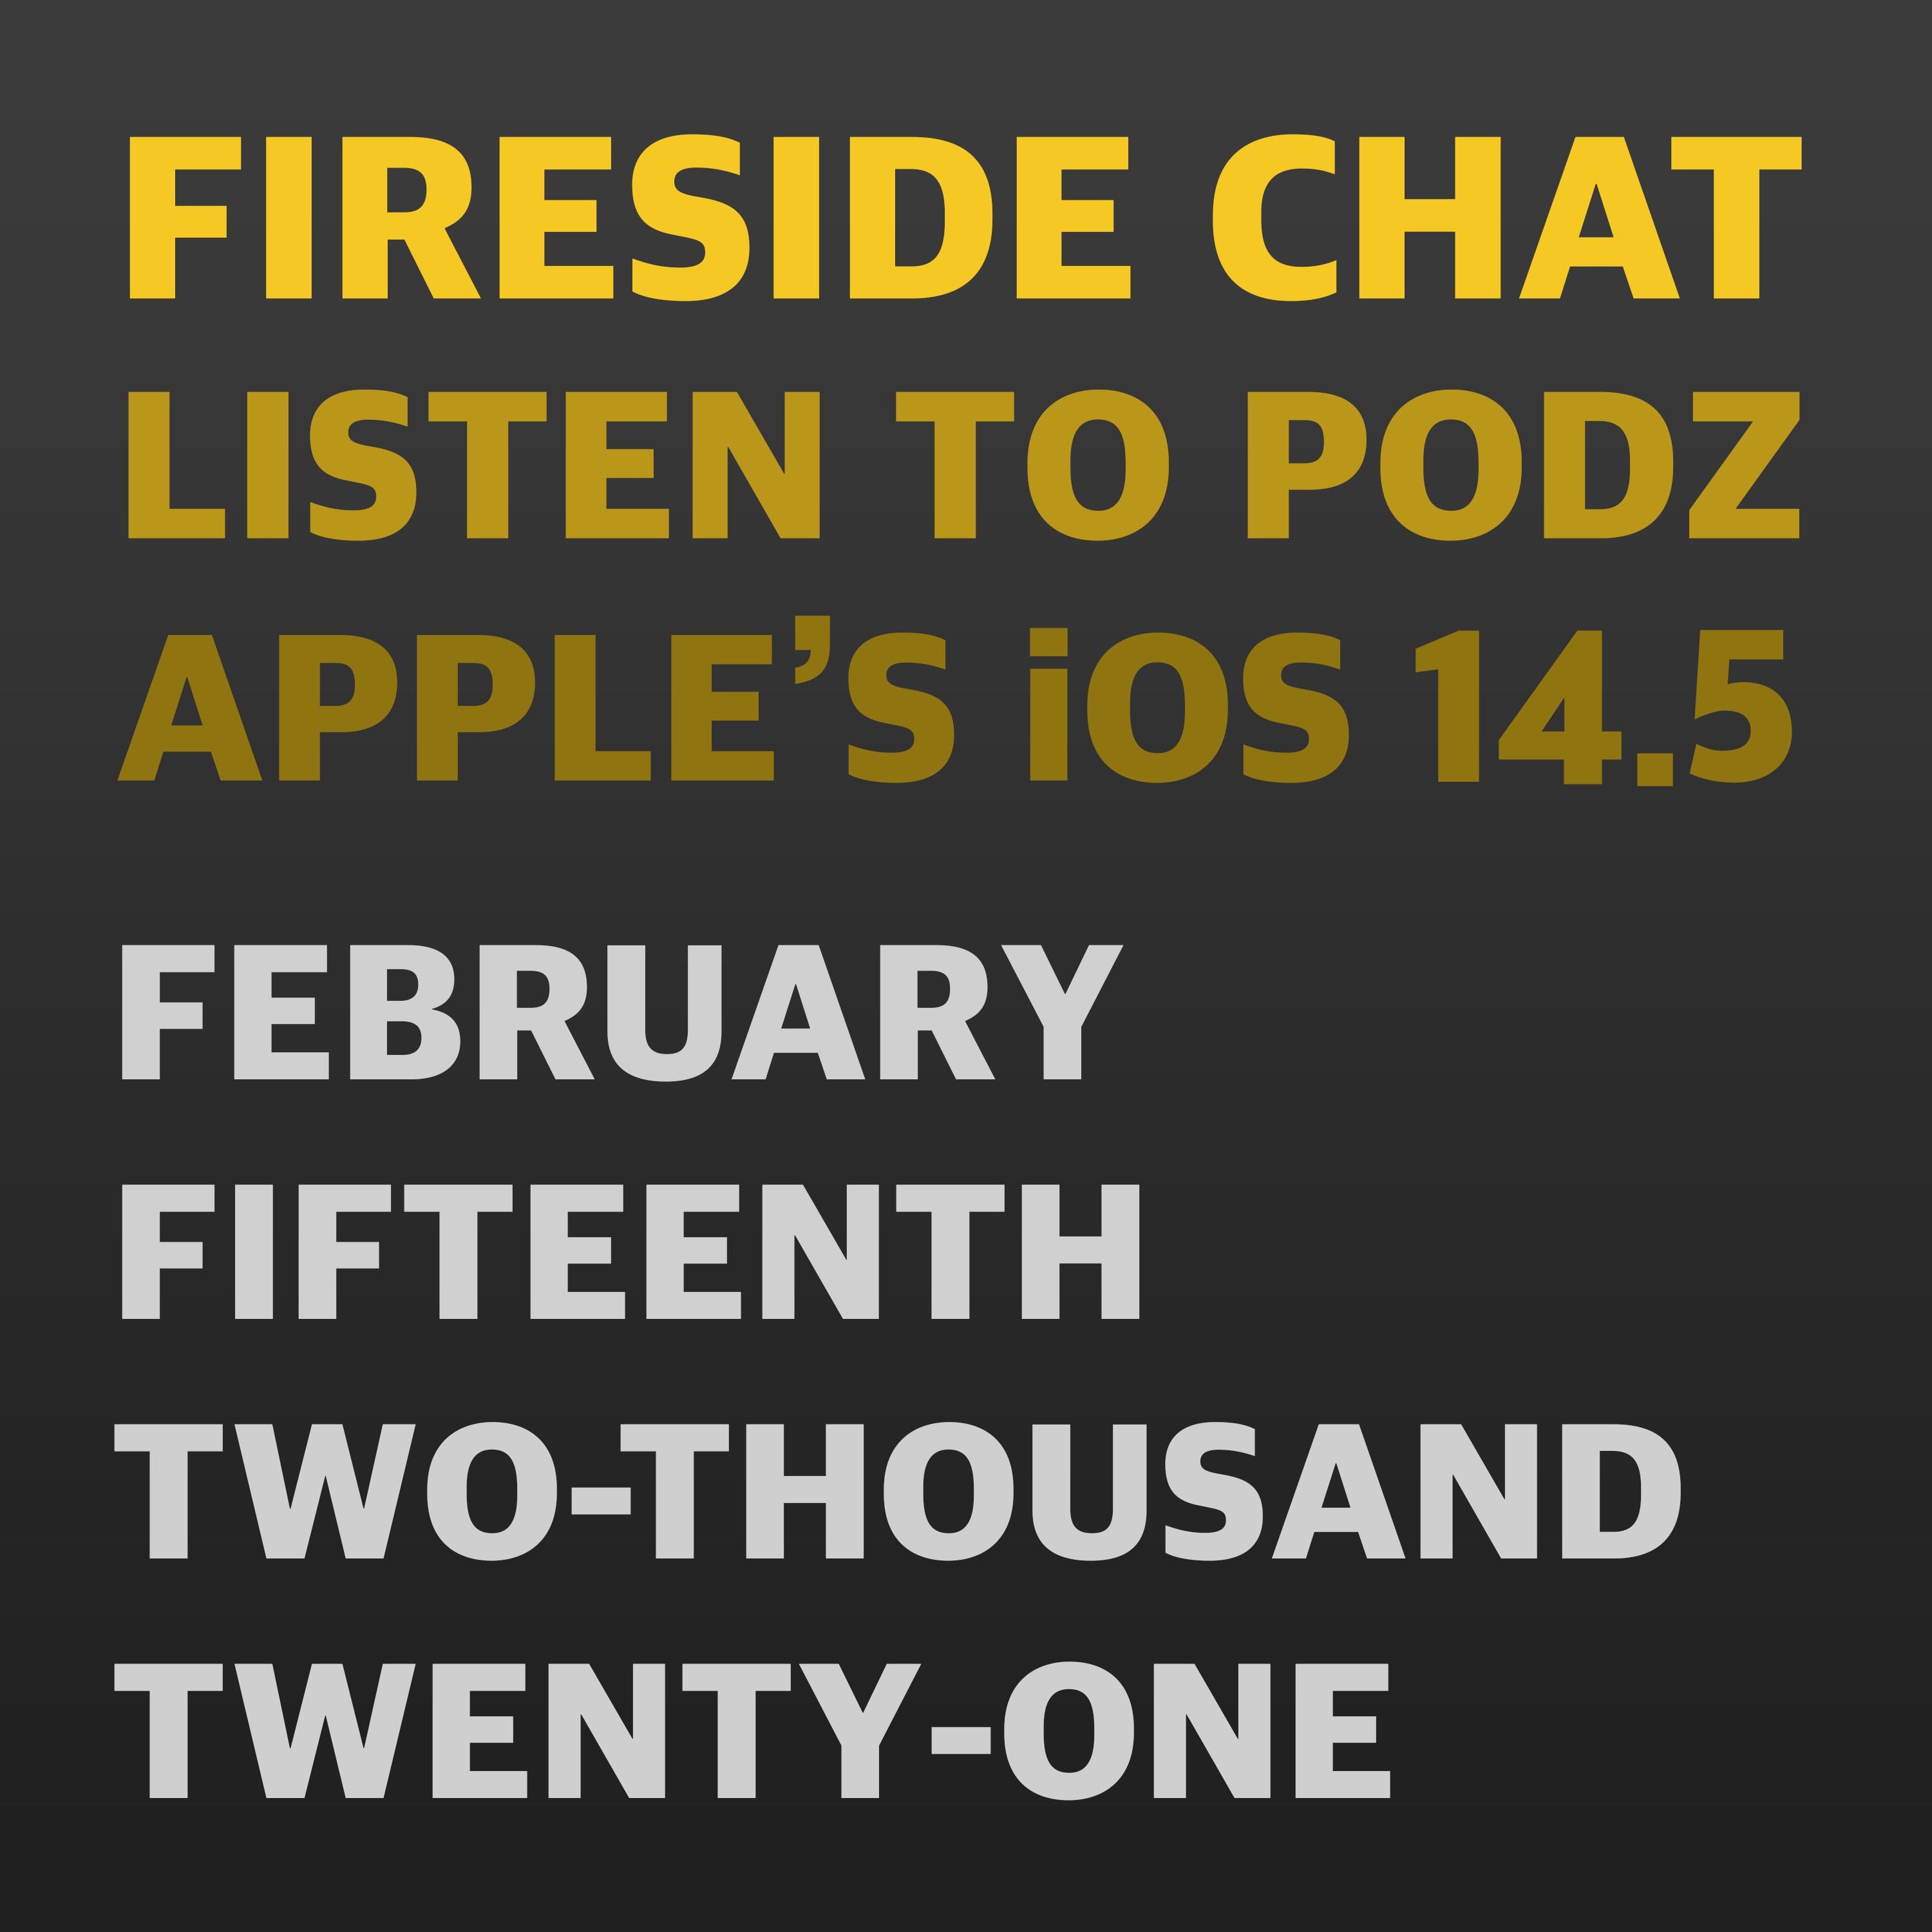 Fireside Chat, Podz, and iOS 14.5